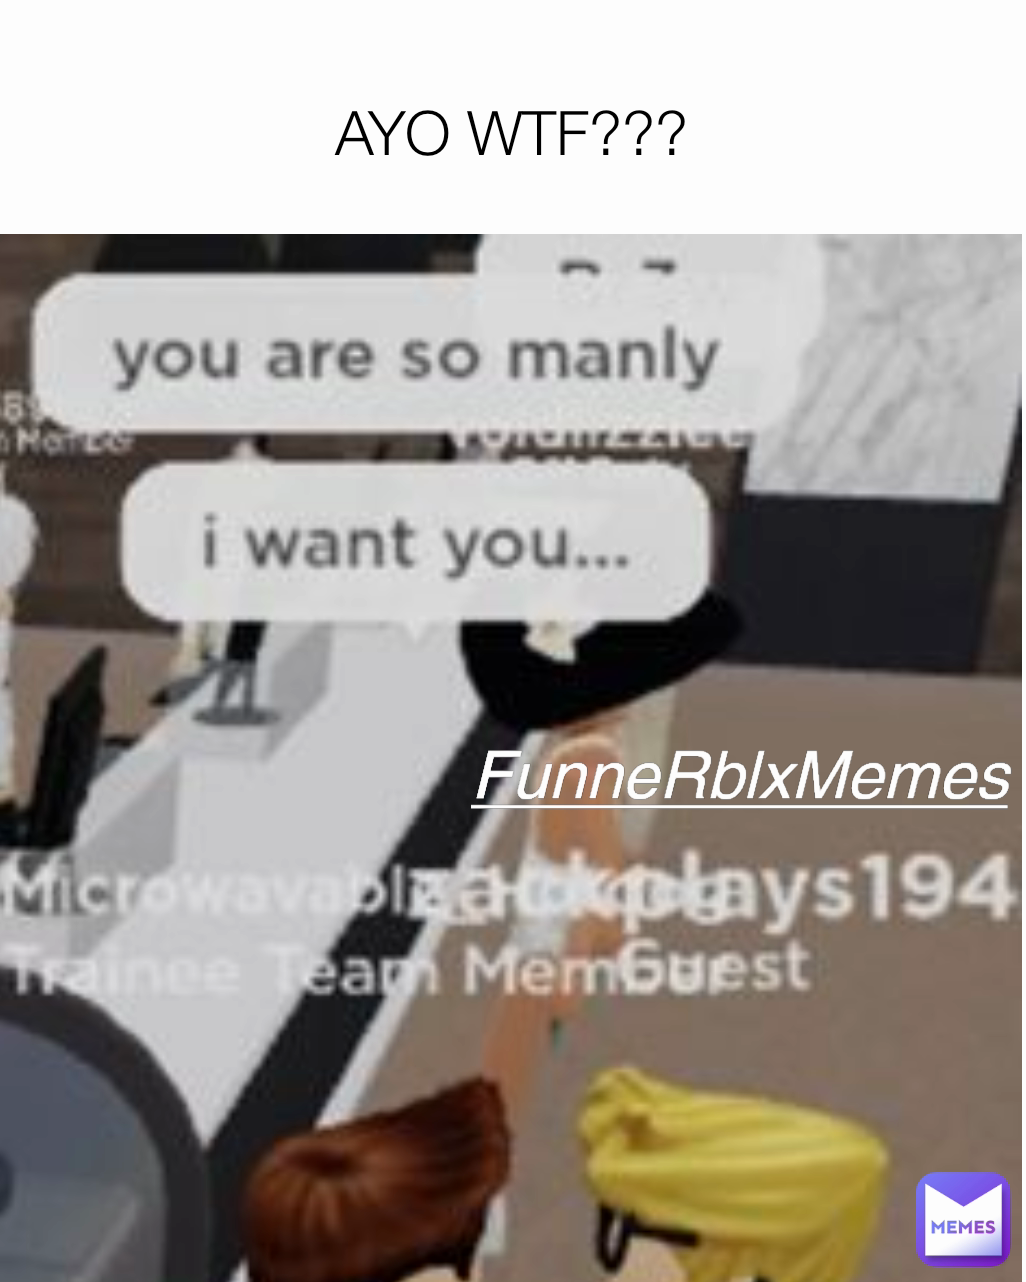 AYO WTF??? FunneRblxMemes